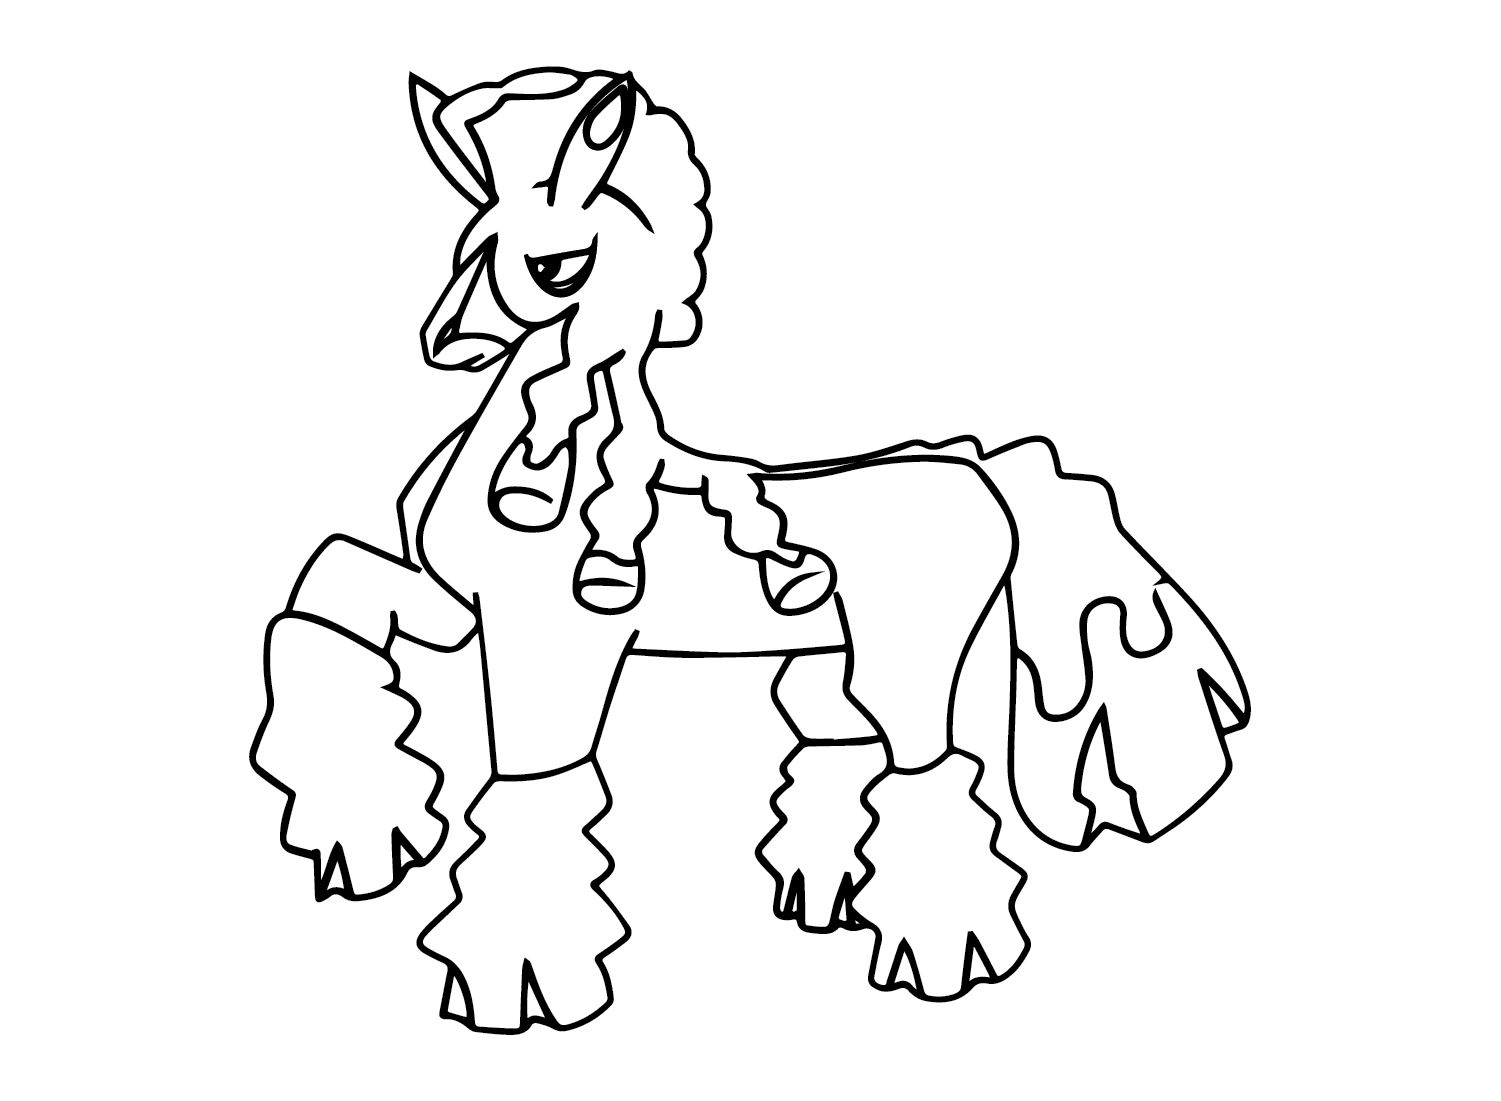 The Mudsdale Coloring Page